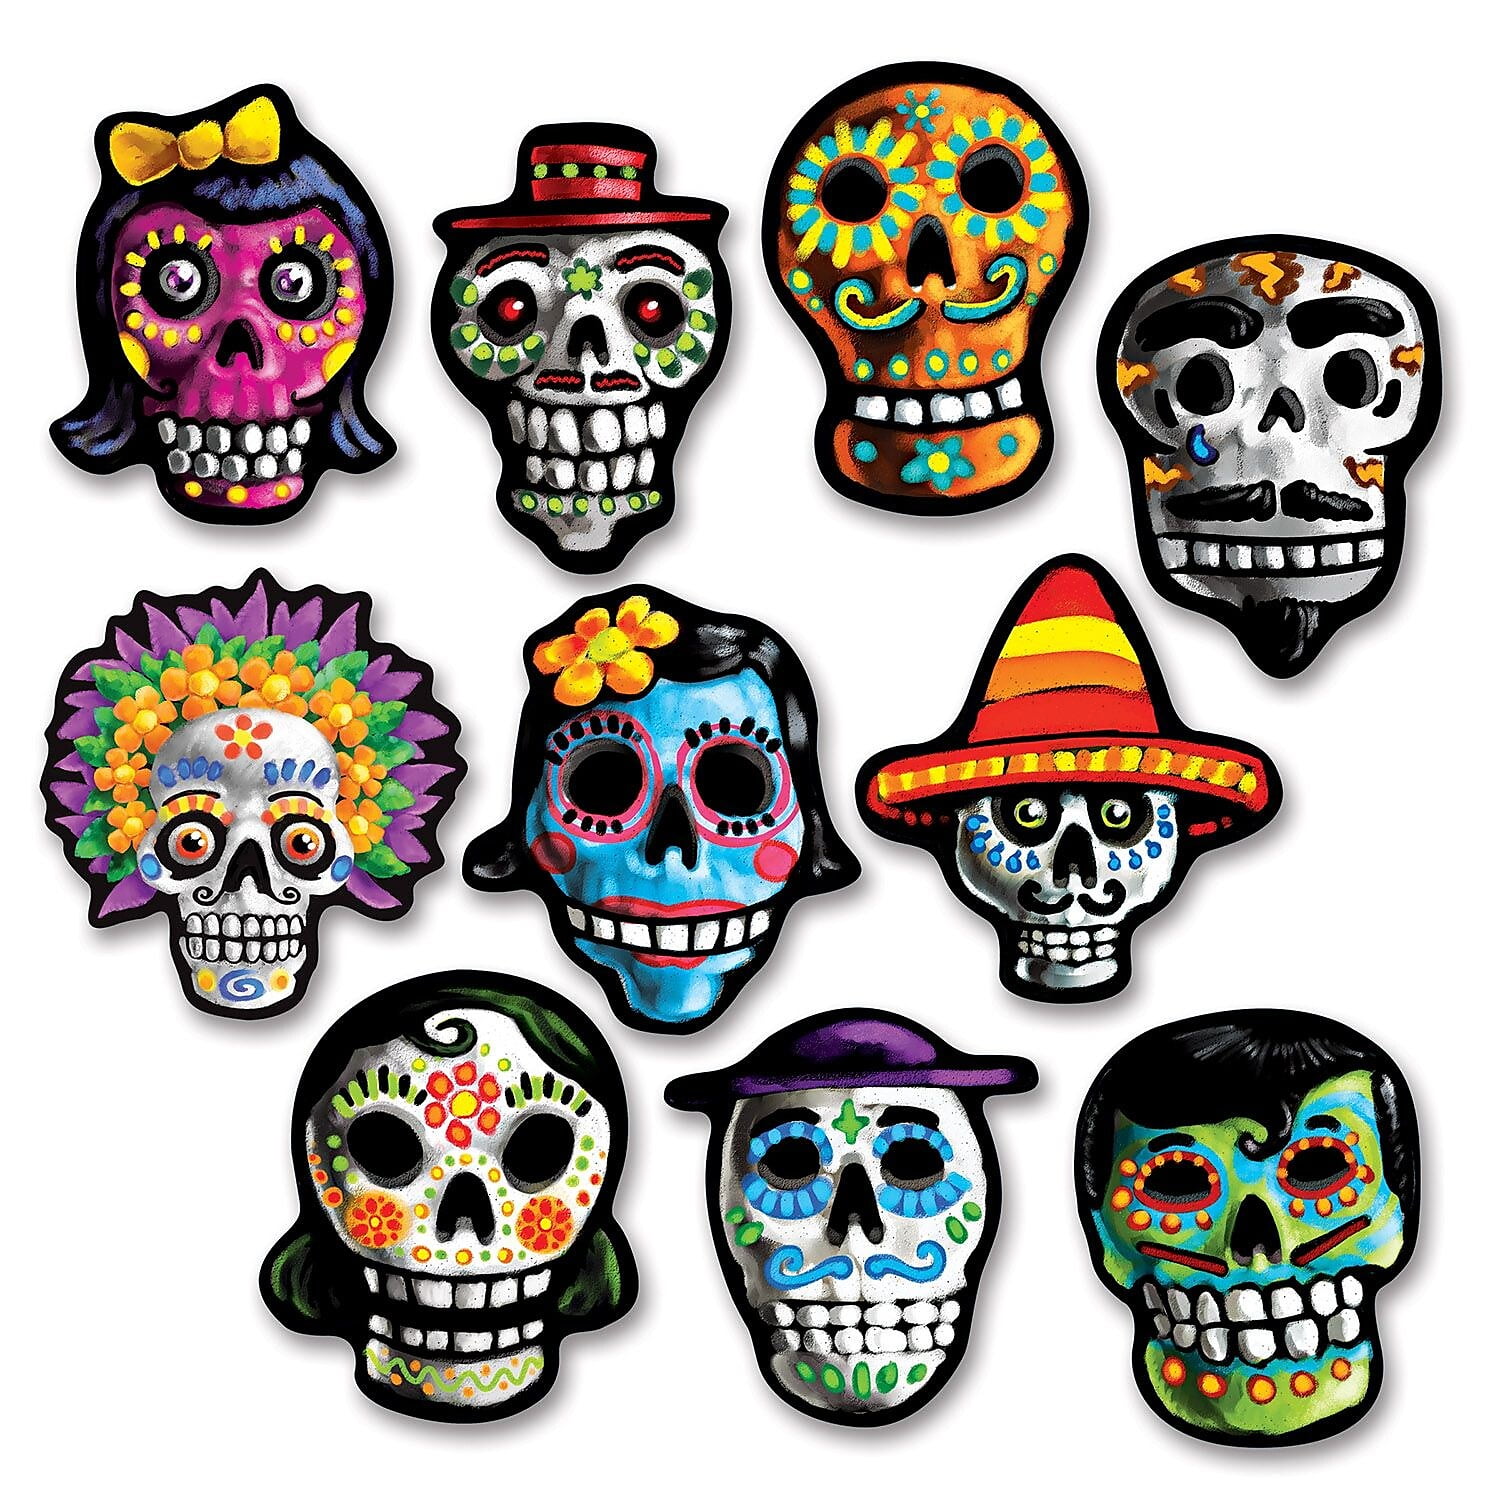 Big Dot of Happiness Day of the Dead Sugar Skull Decorations DIY Halloween Party Essentials Set of 20